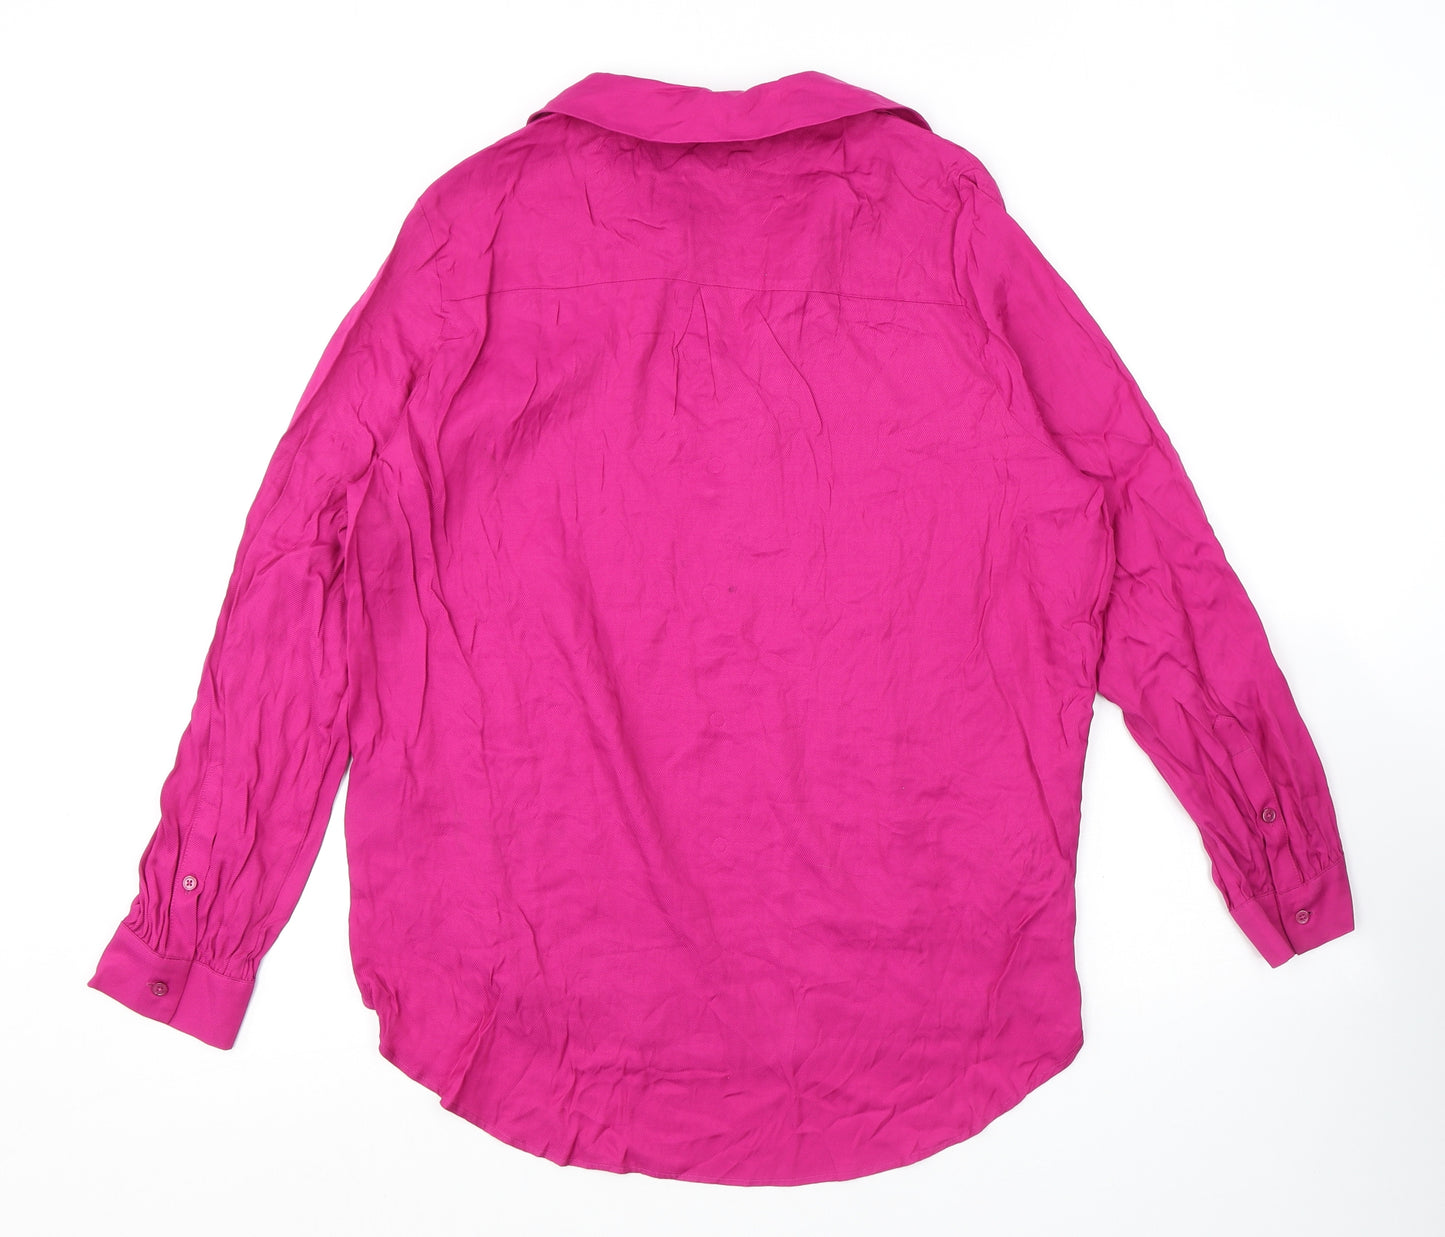 Autograph Womens Pink Viscose Basic Blouse Size 14 Collared